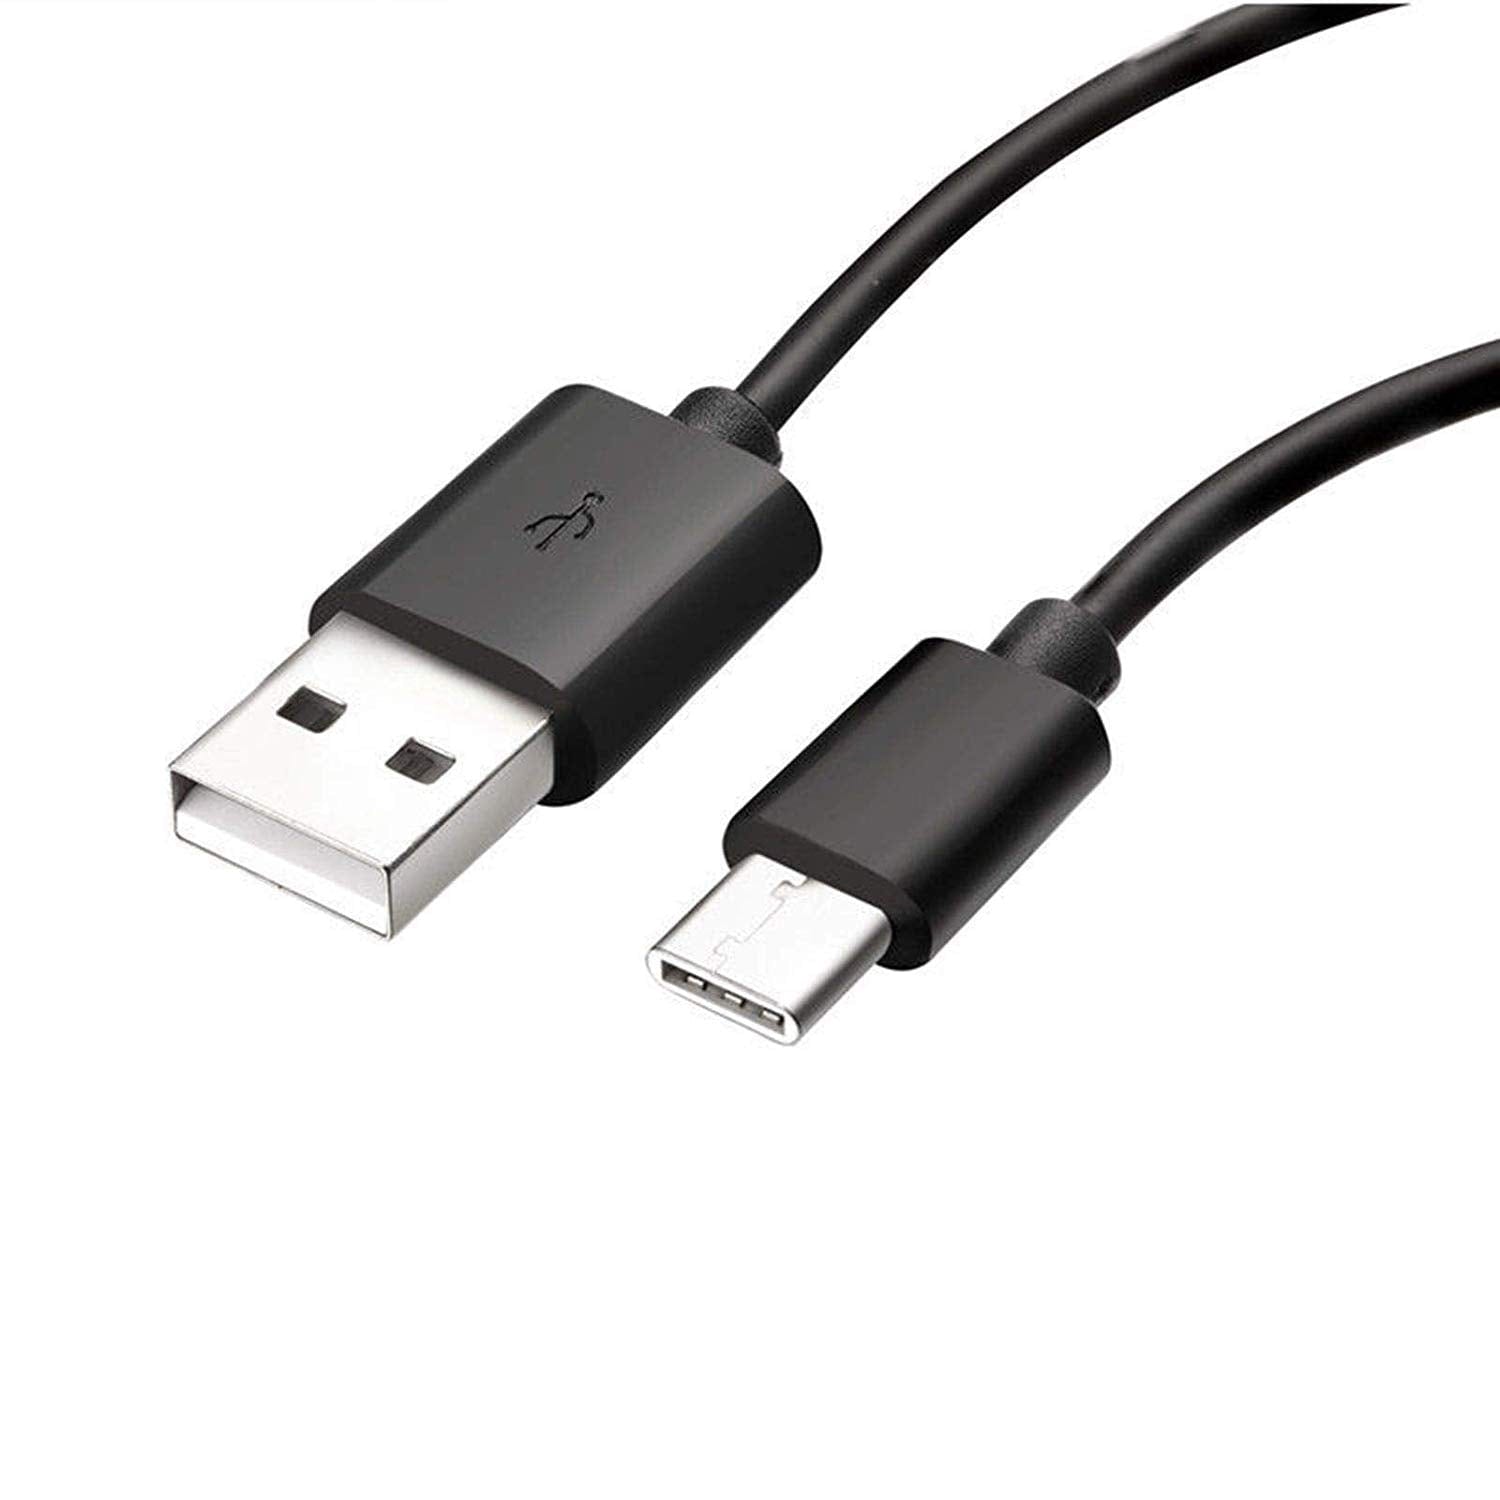 Samsung Galaxy A70 USB Cable to Type C Charging Cable Lead Black - 1M - SmartPhoneGadgetUK